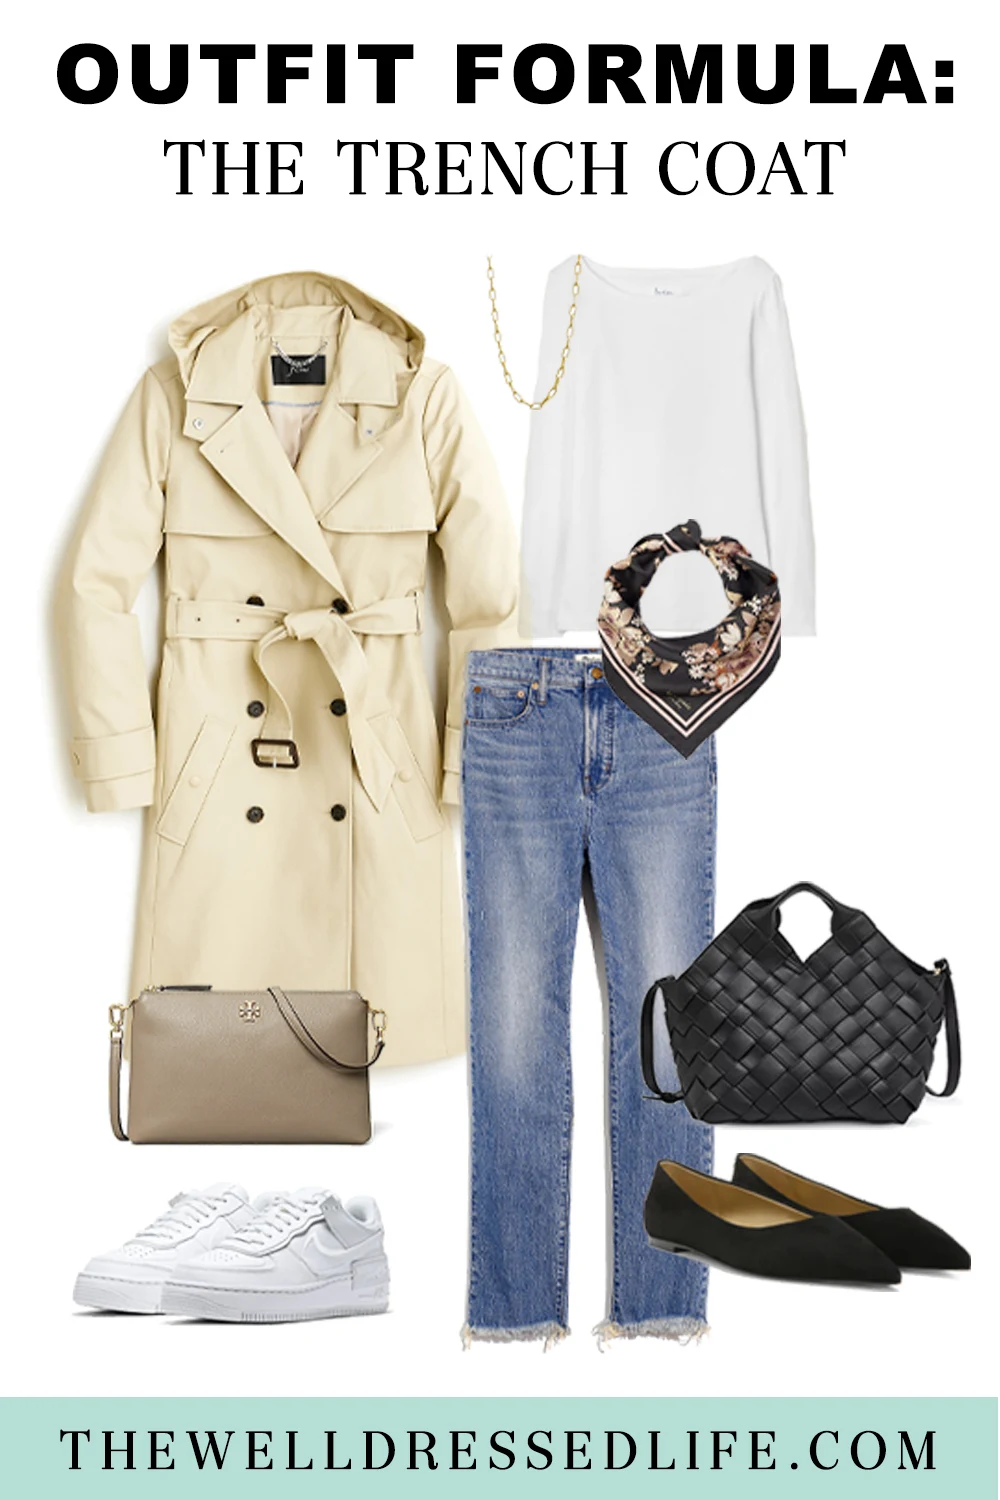 Outfit Formula: The Trench Coat